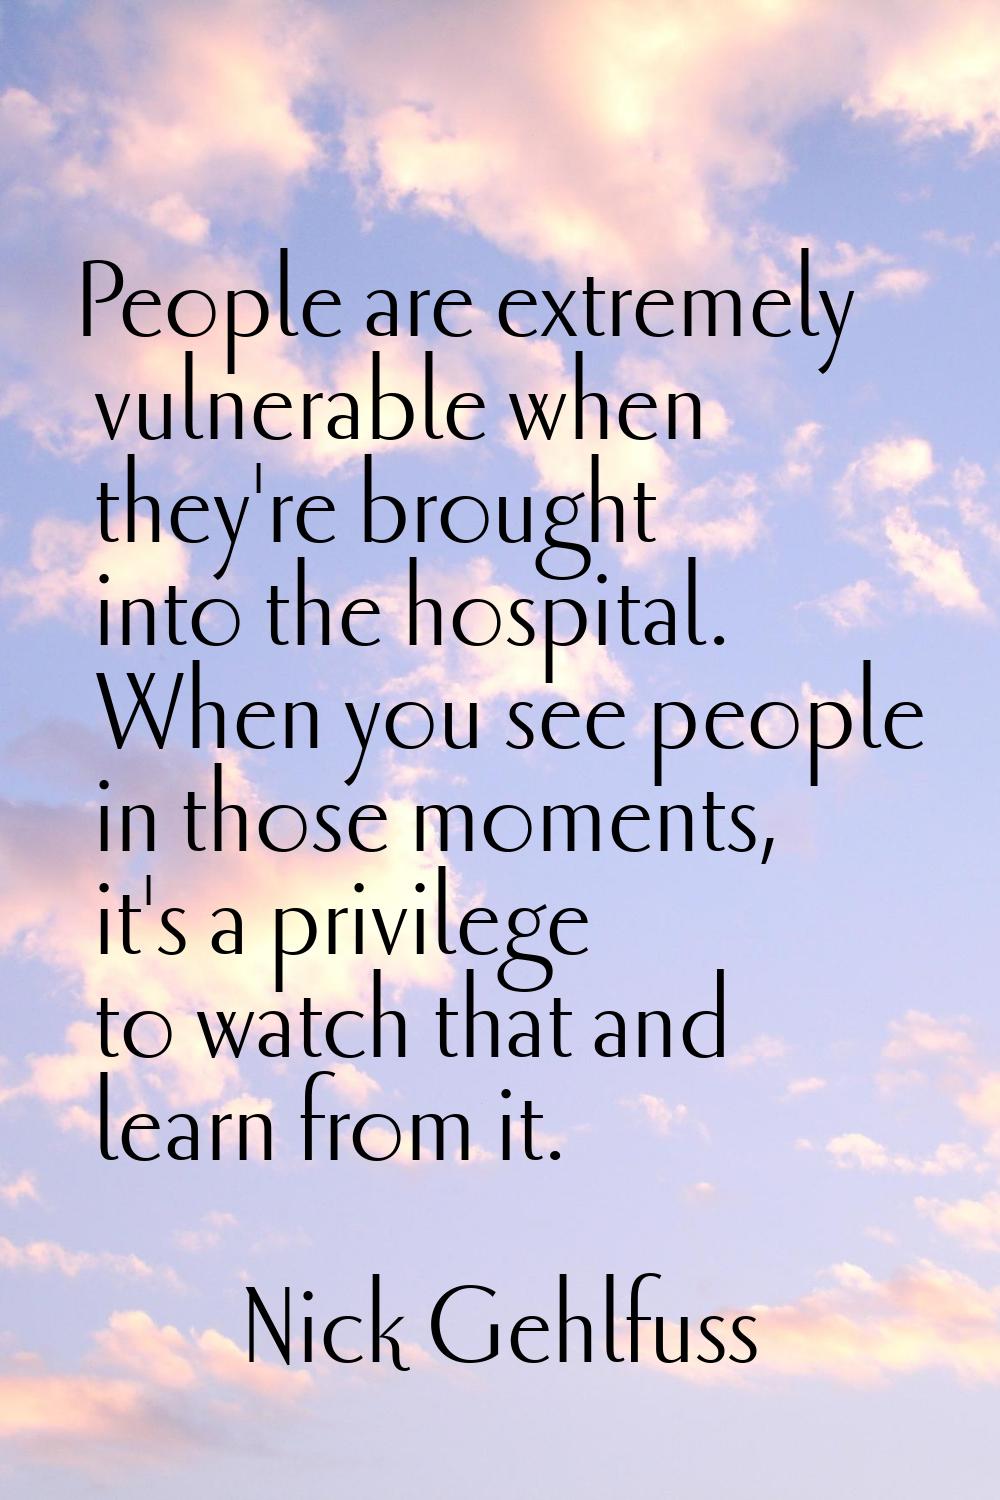 People are extremely vulnerable when they're brought into the hospital. When you see people in thos